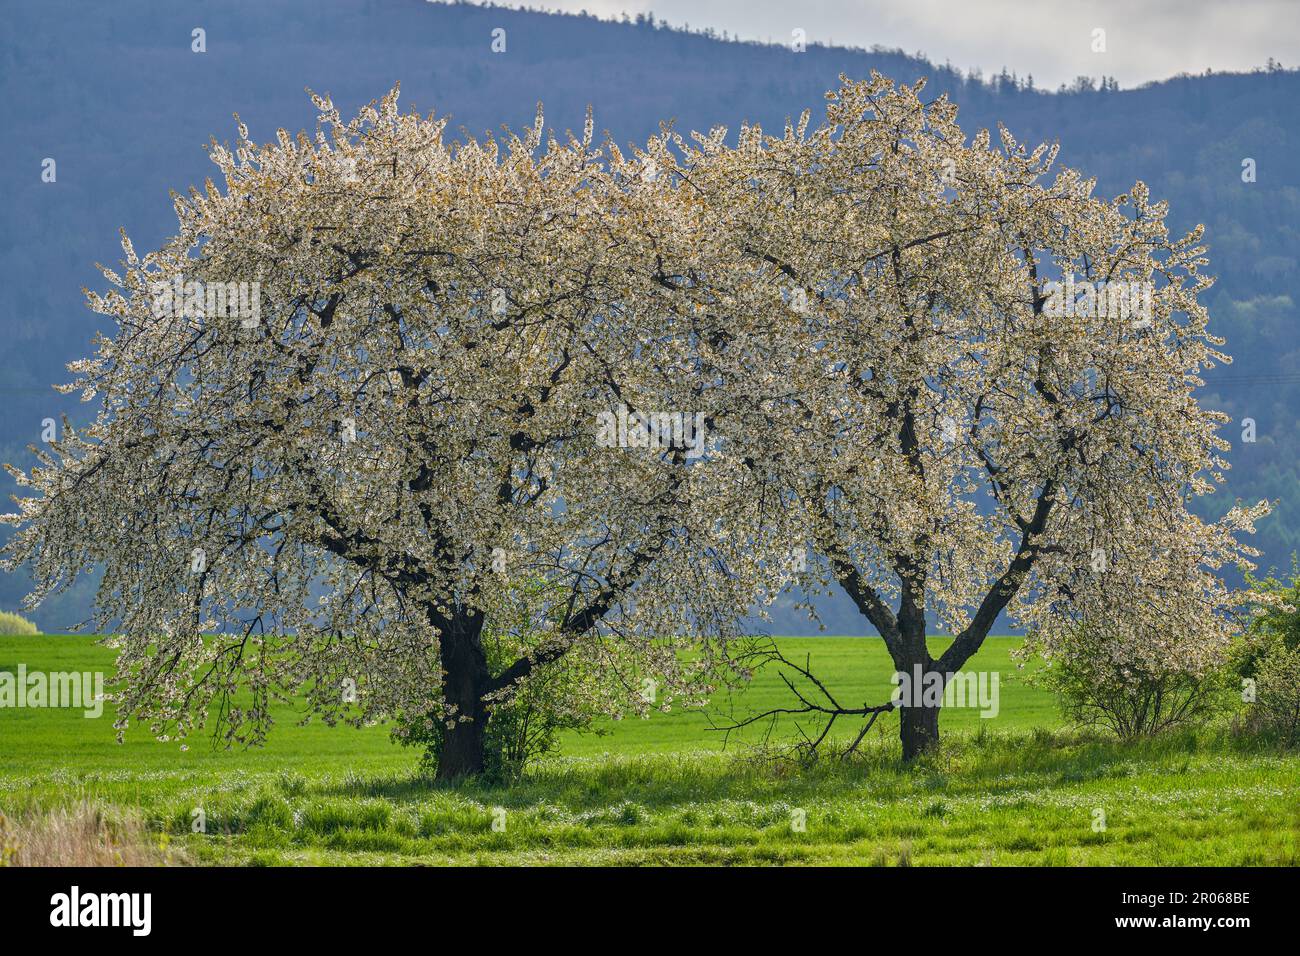 Cherry trees blooming in the spring Stock Photo